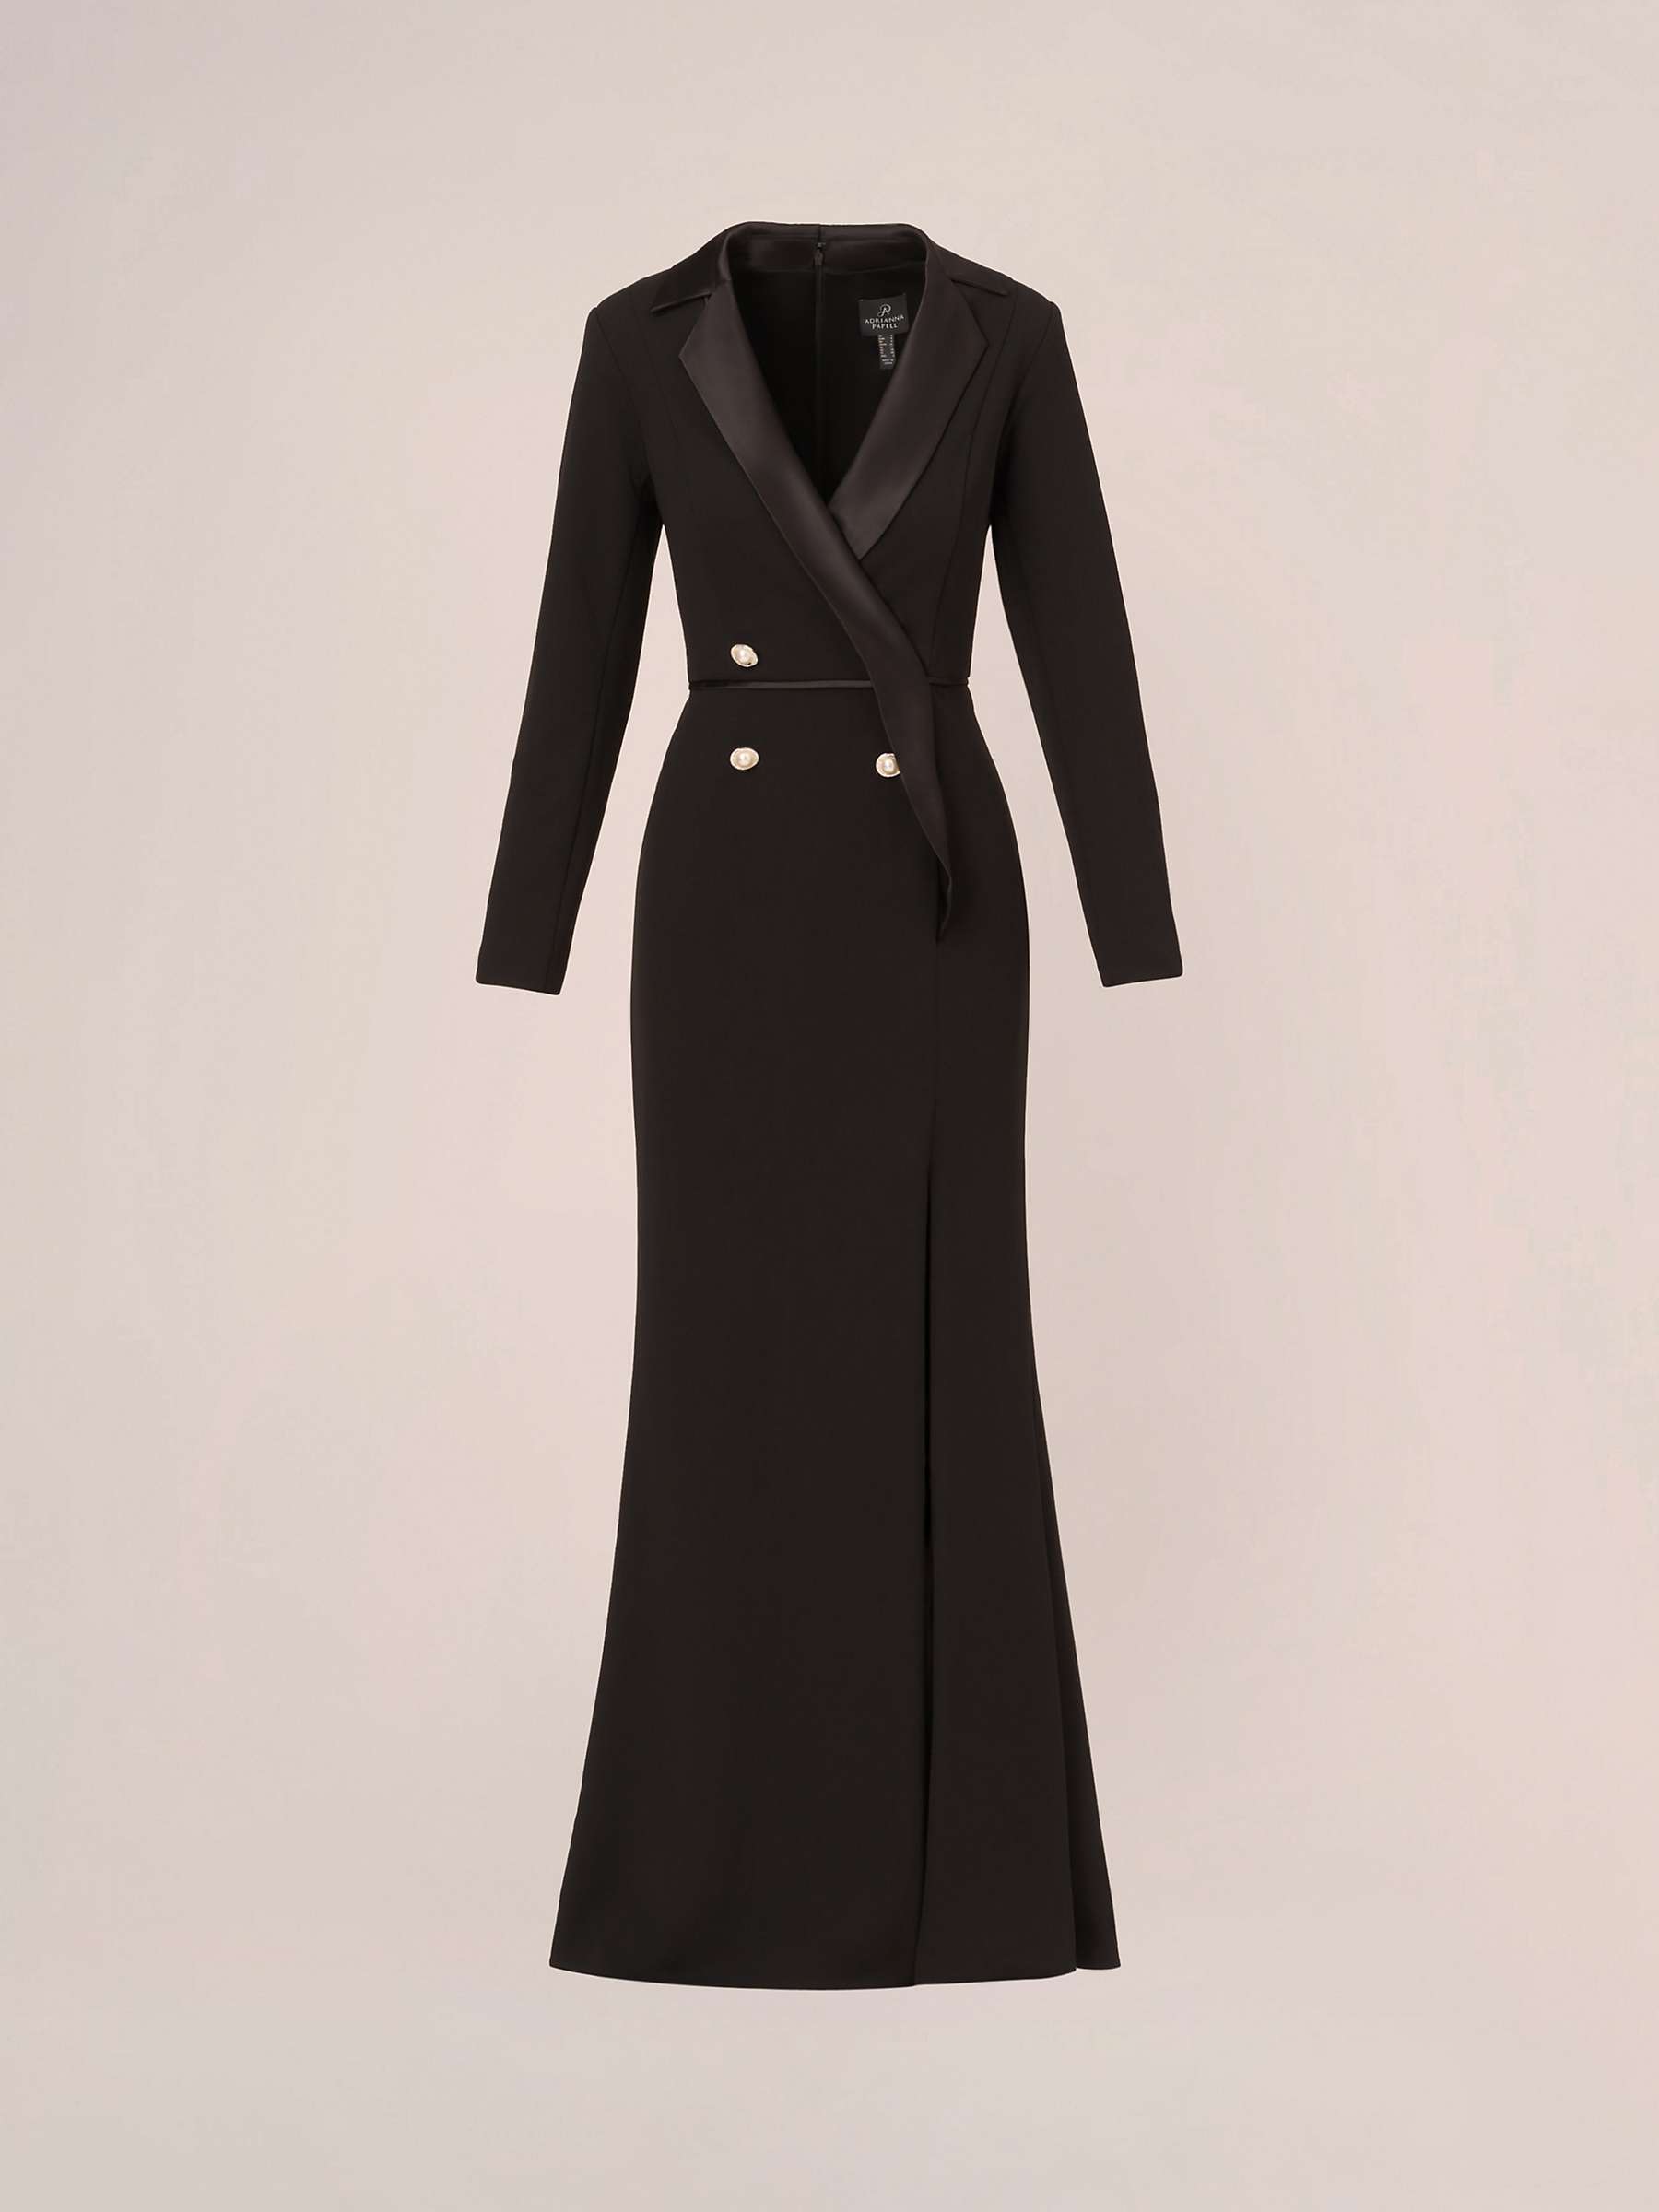 Buy Adrianna Papell Jewel Buttons Maxi Tuxedo Dress, Black Online at johnlewis.com